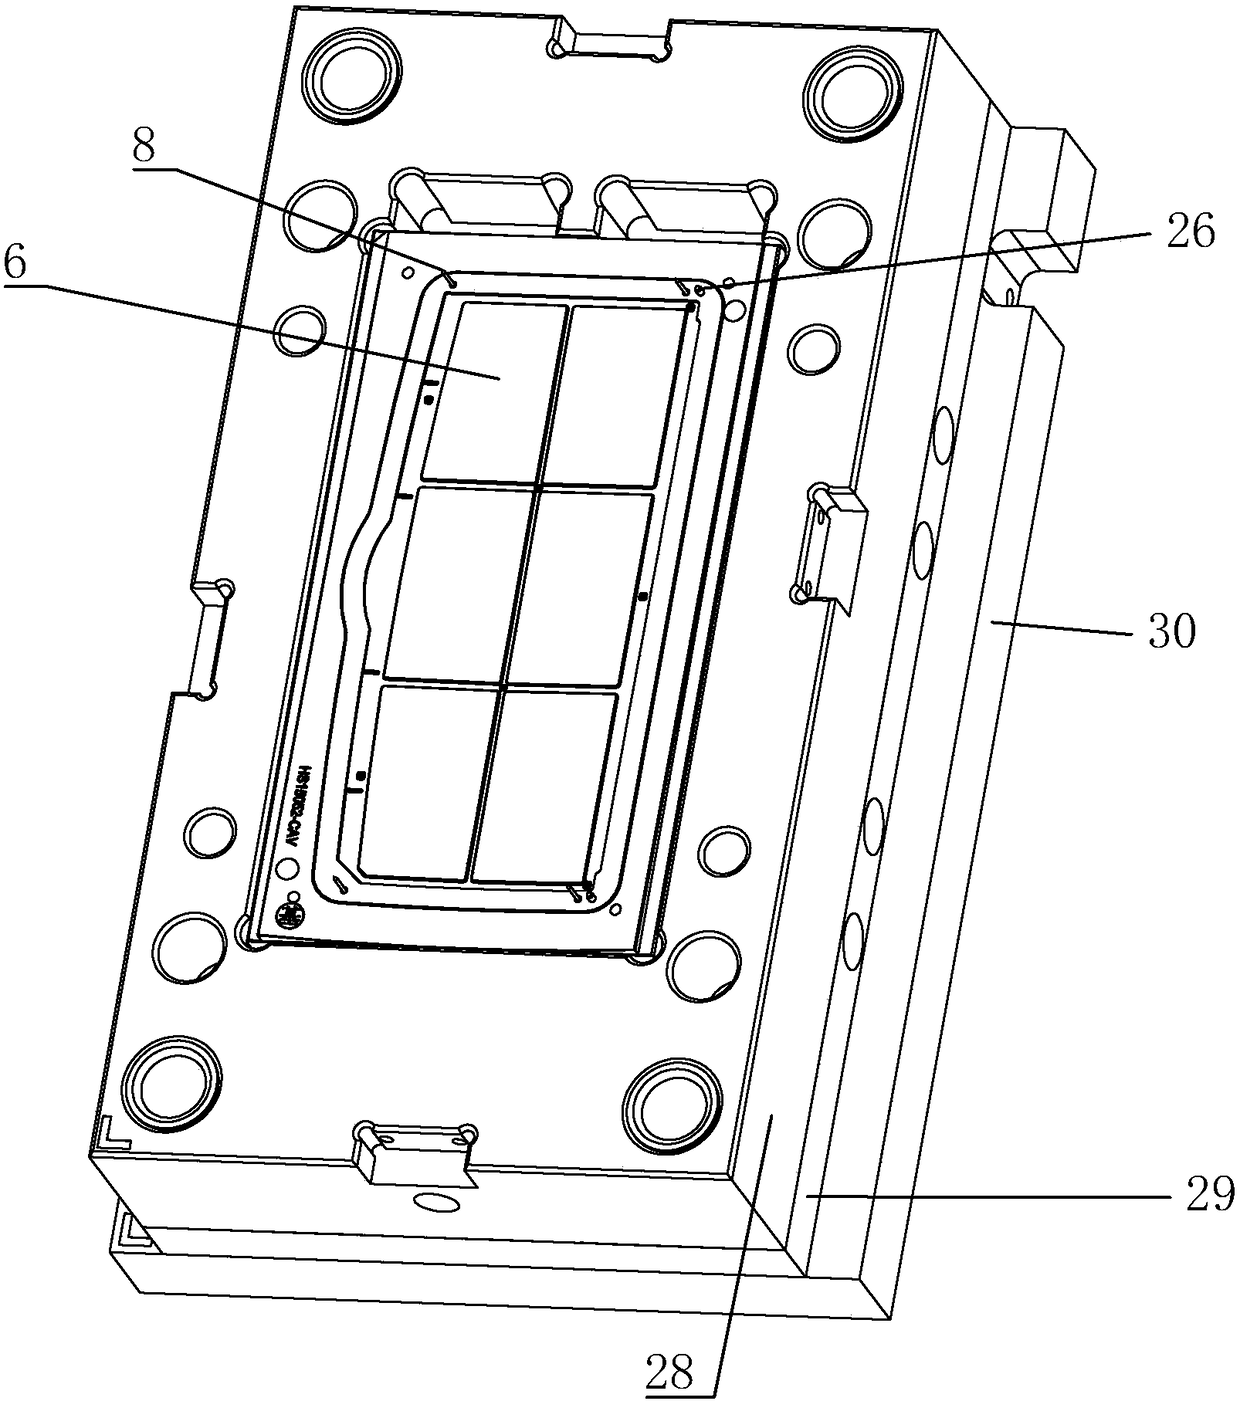 A filter injection mold